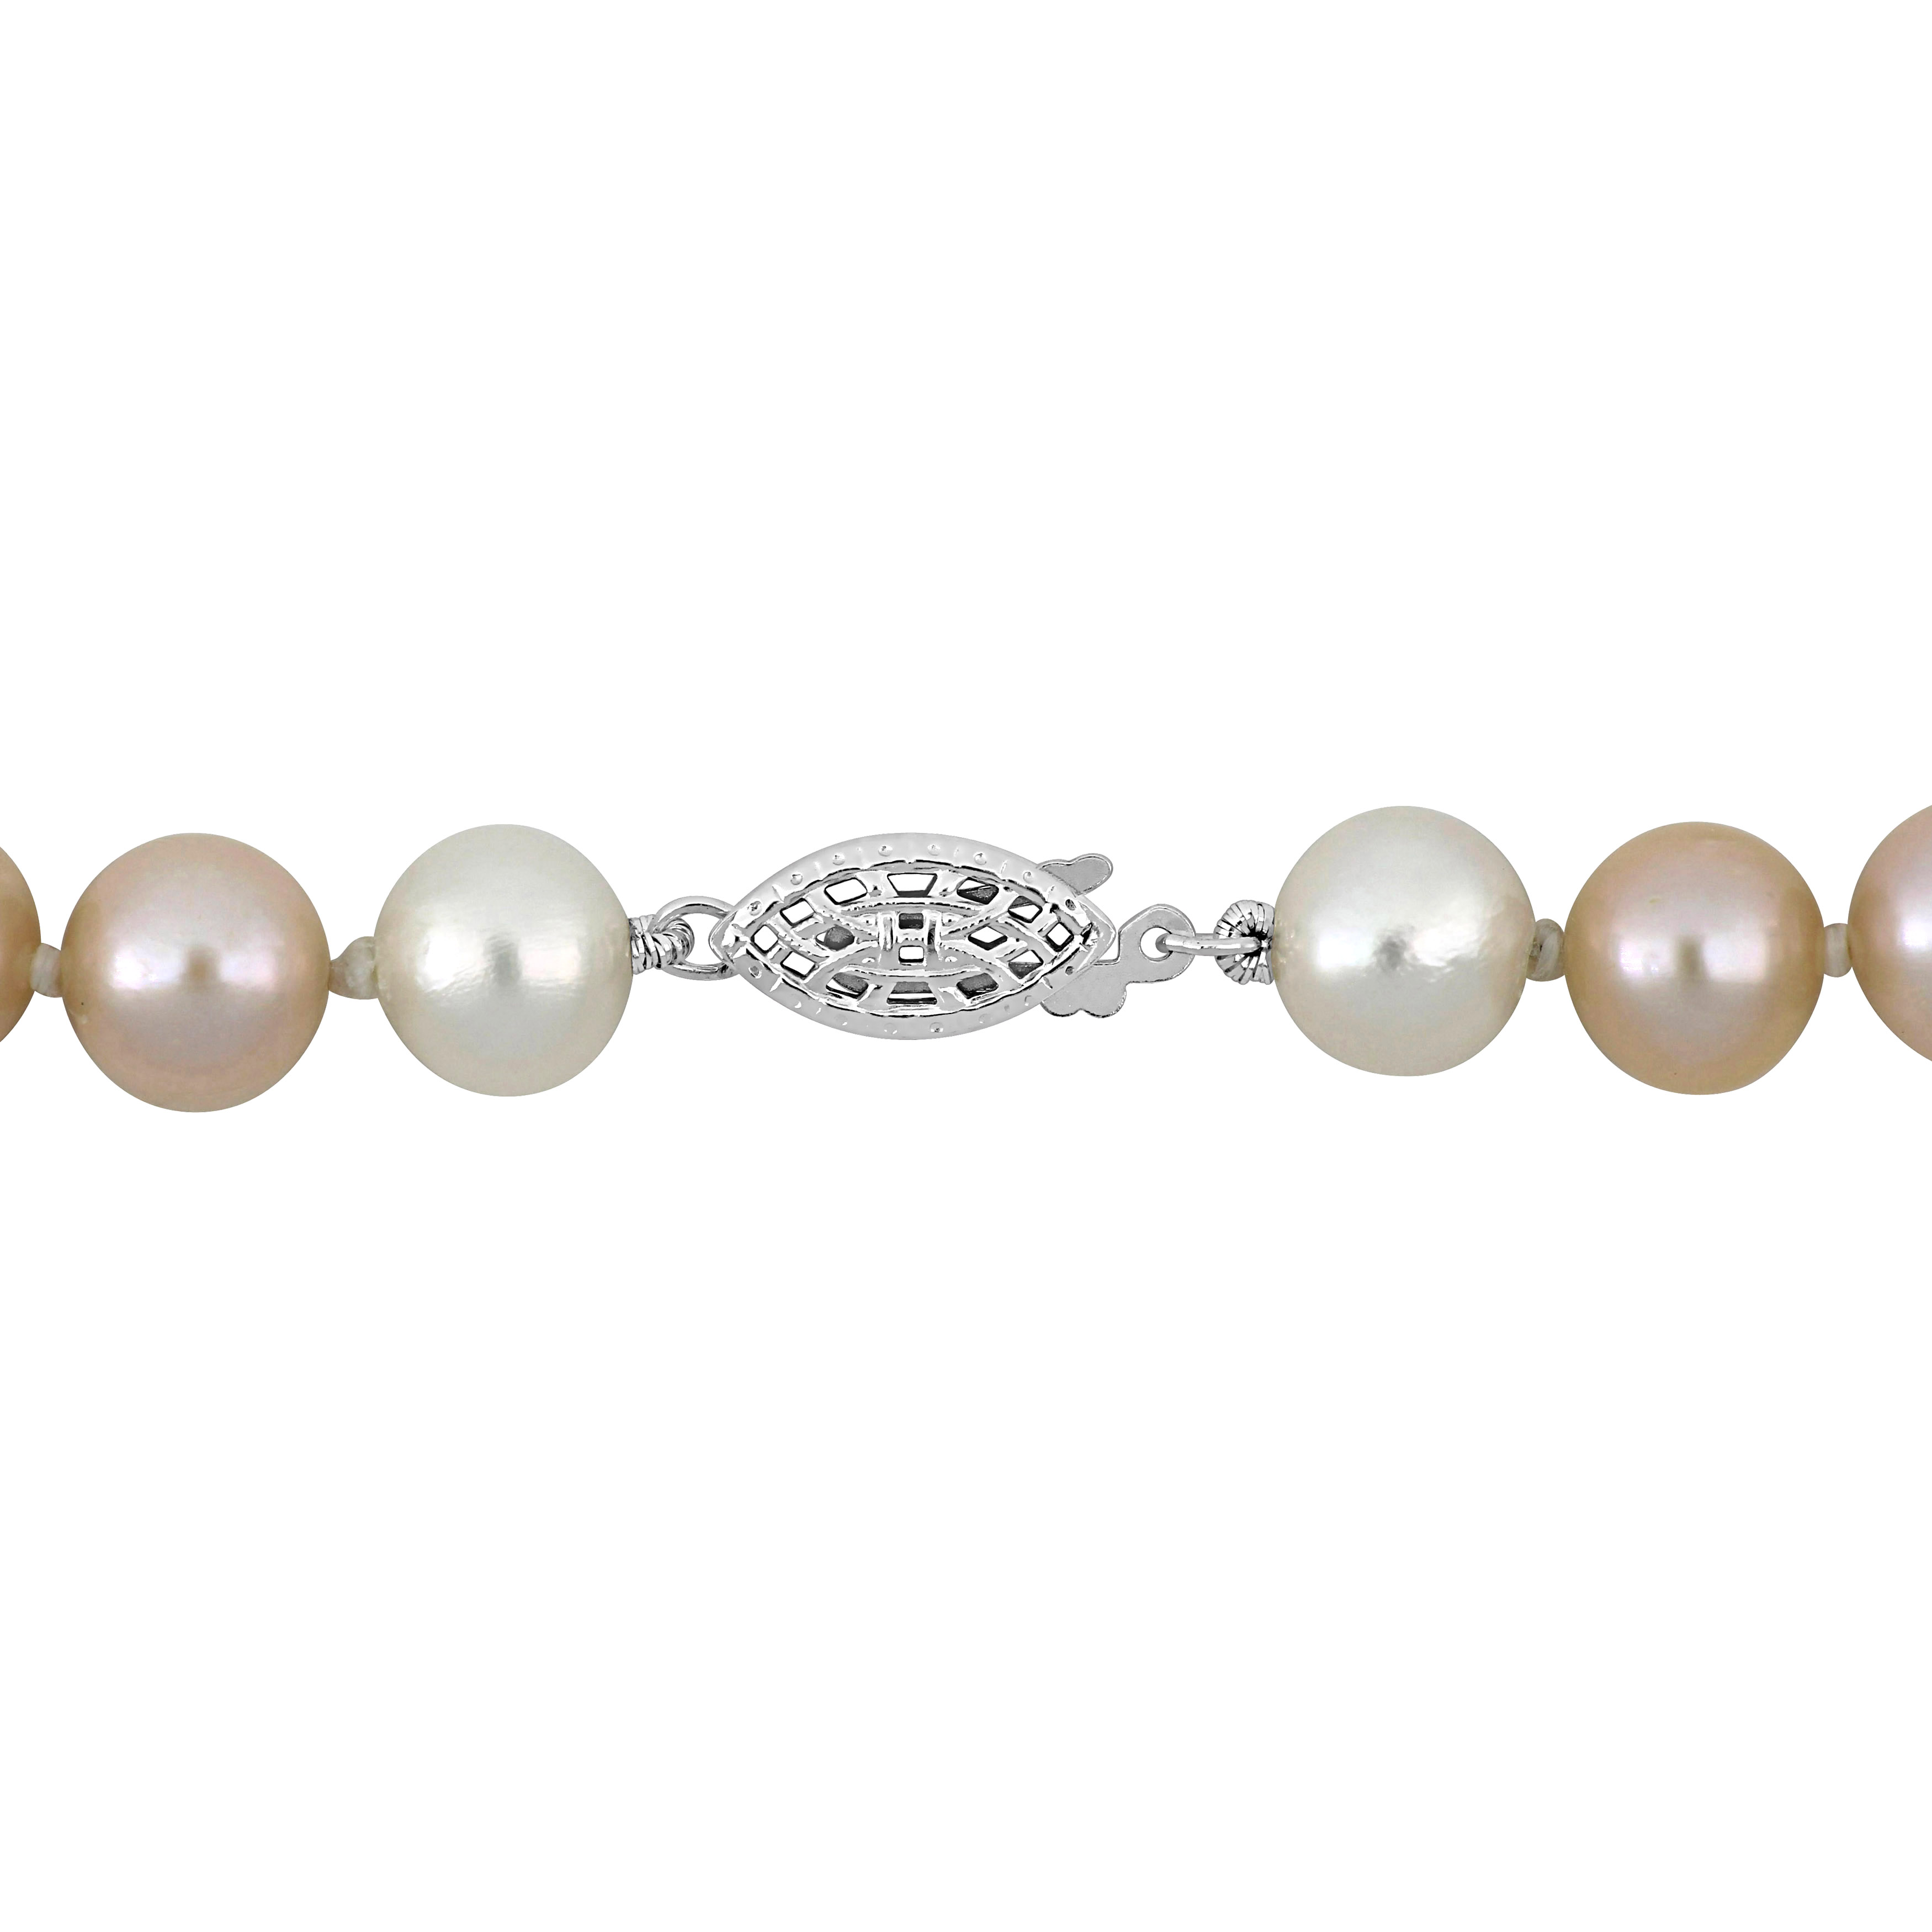 8-8.5 MM Multi-Colored Cultured Freshwater Pearl Graduated Necklace in Sterling Silver - 18 in